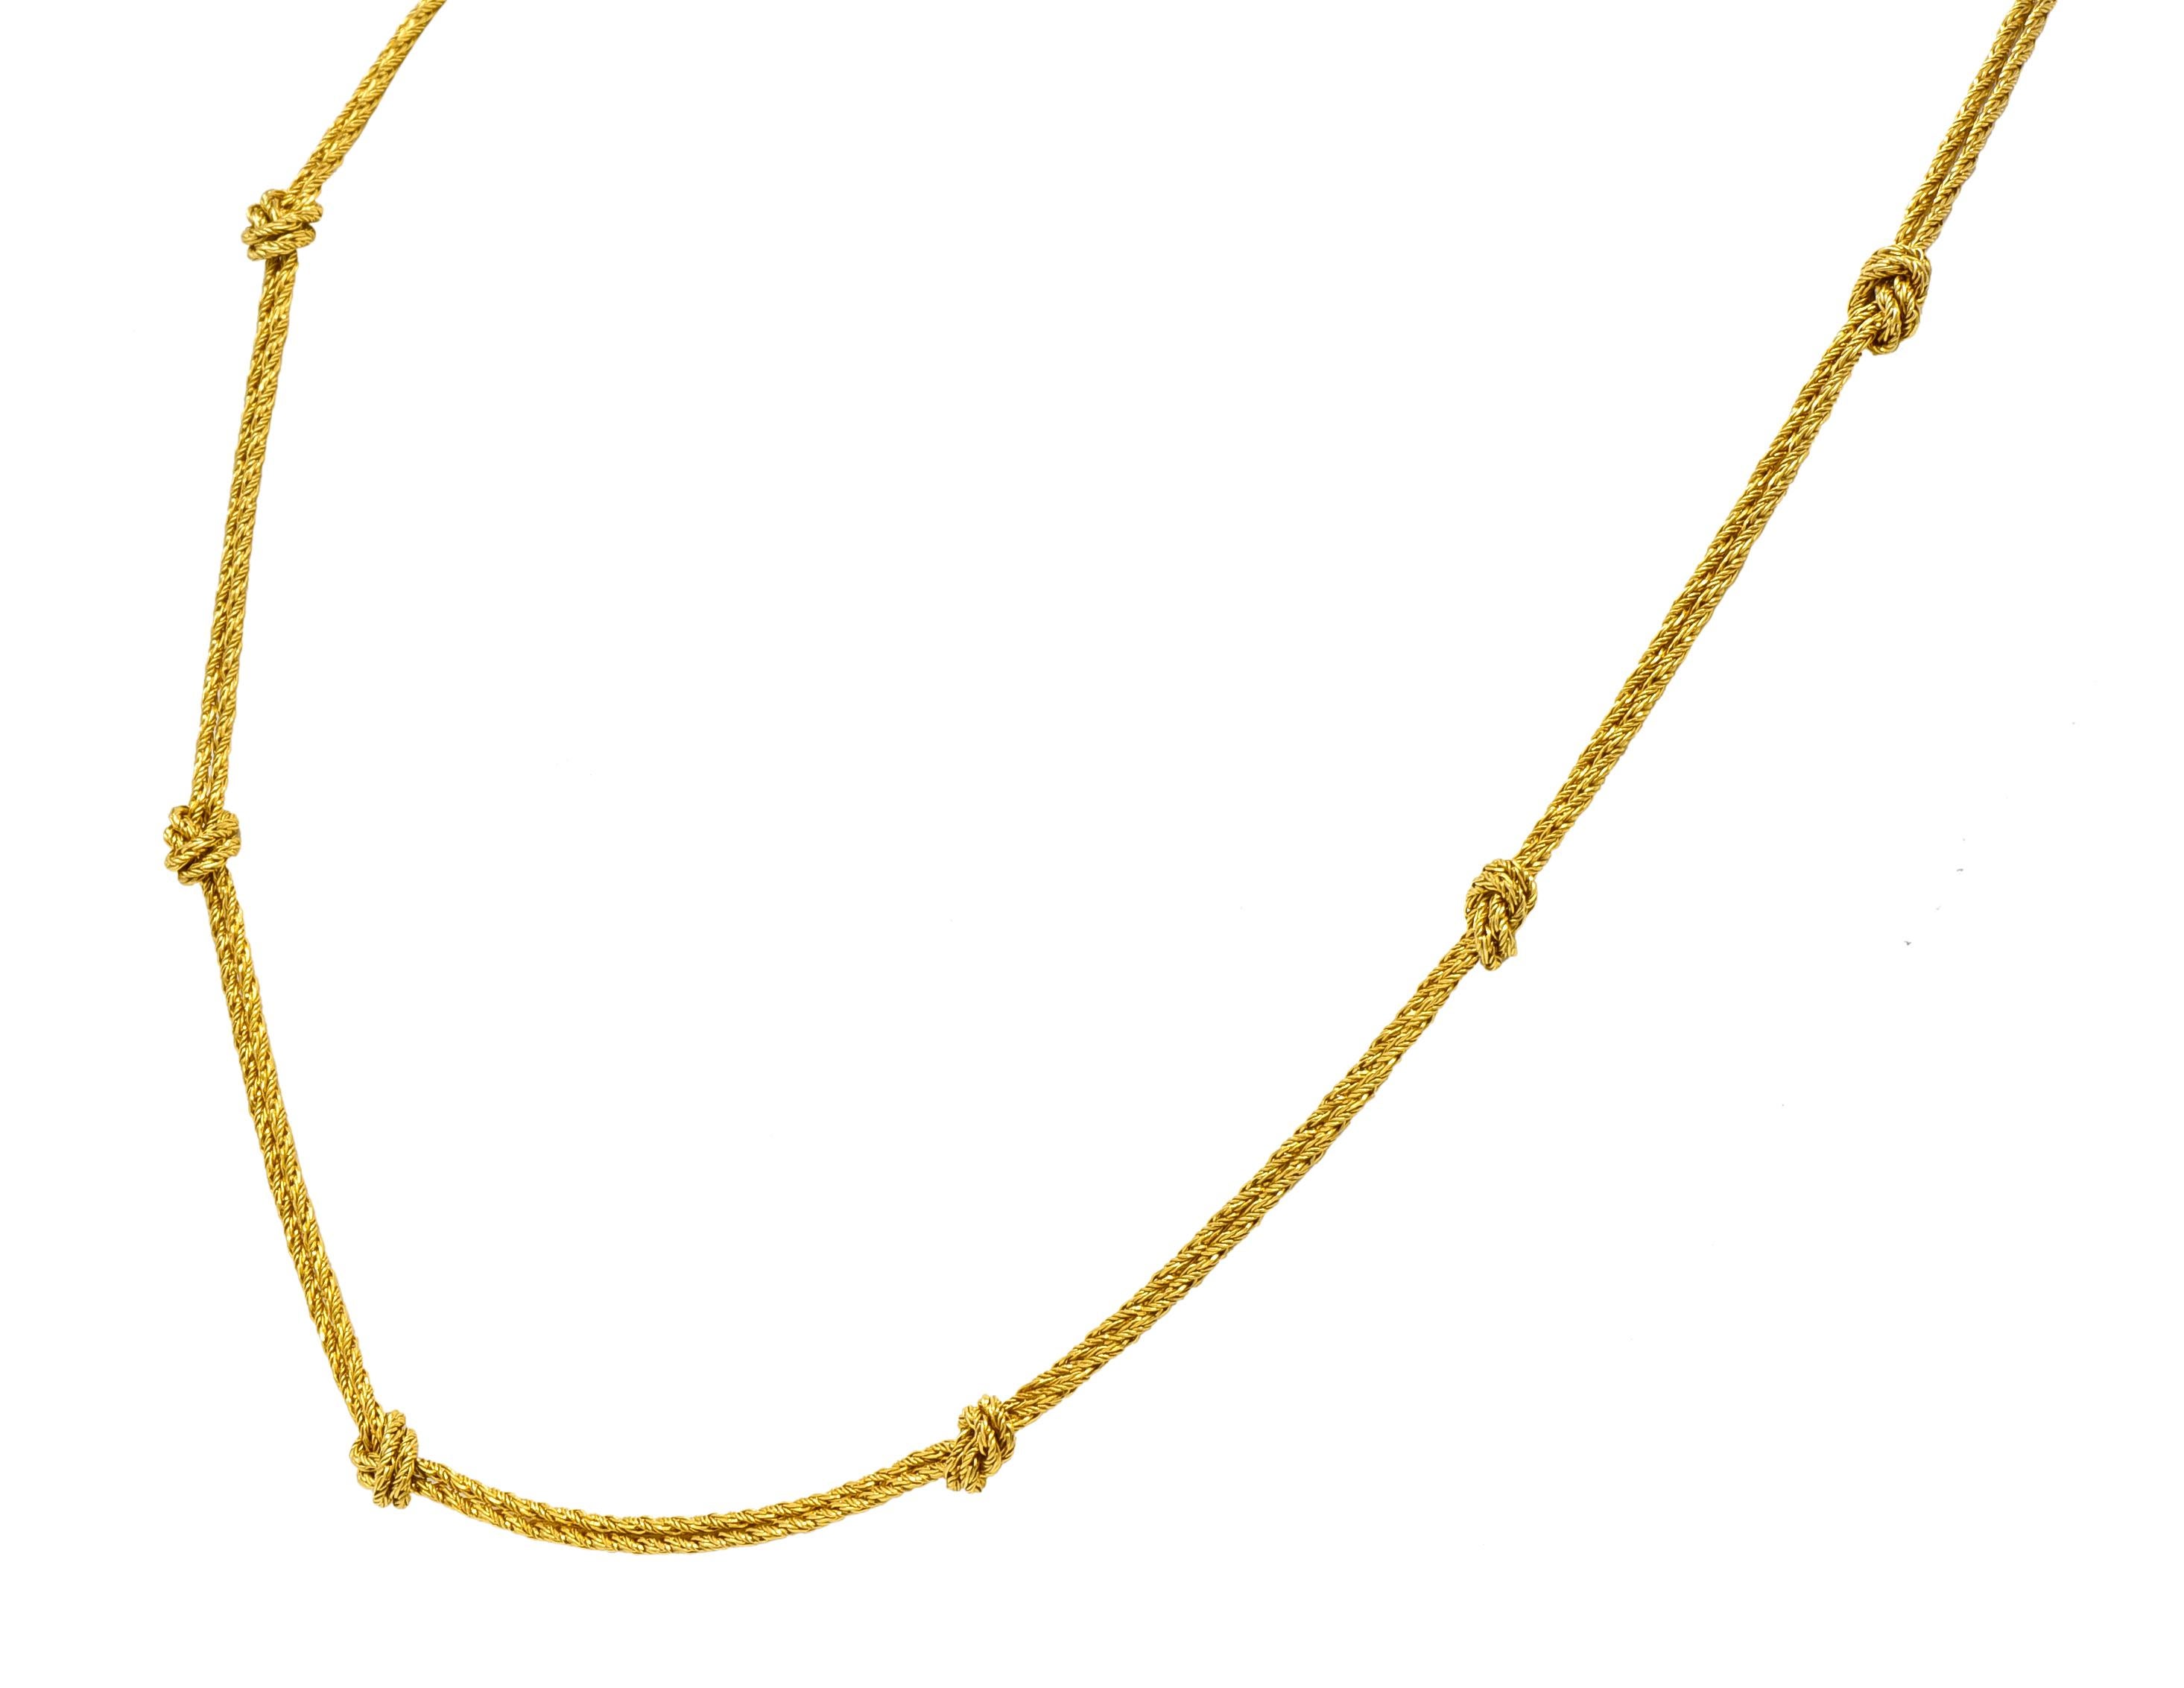 Necklace designed as two strands of wheat chain with eleven knotted stations

Beautiful antiqued finish and completed by spring ring clasp

Fully signed Tiffany & Co. Germany

Stamped 750 for 18 karat gold

Length: 24 inch

Width: 1/4 inch

Total